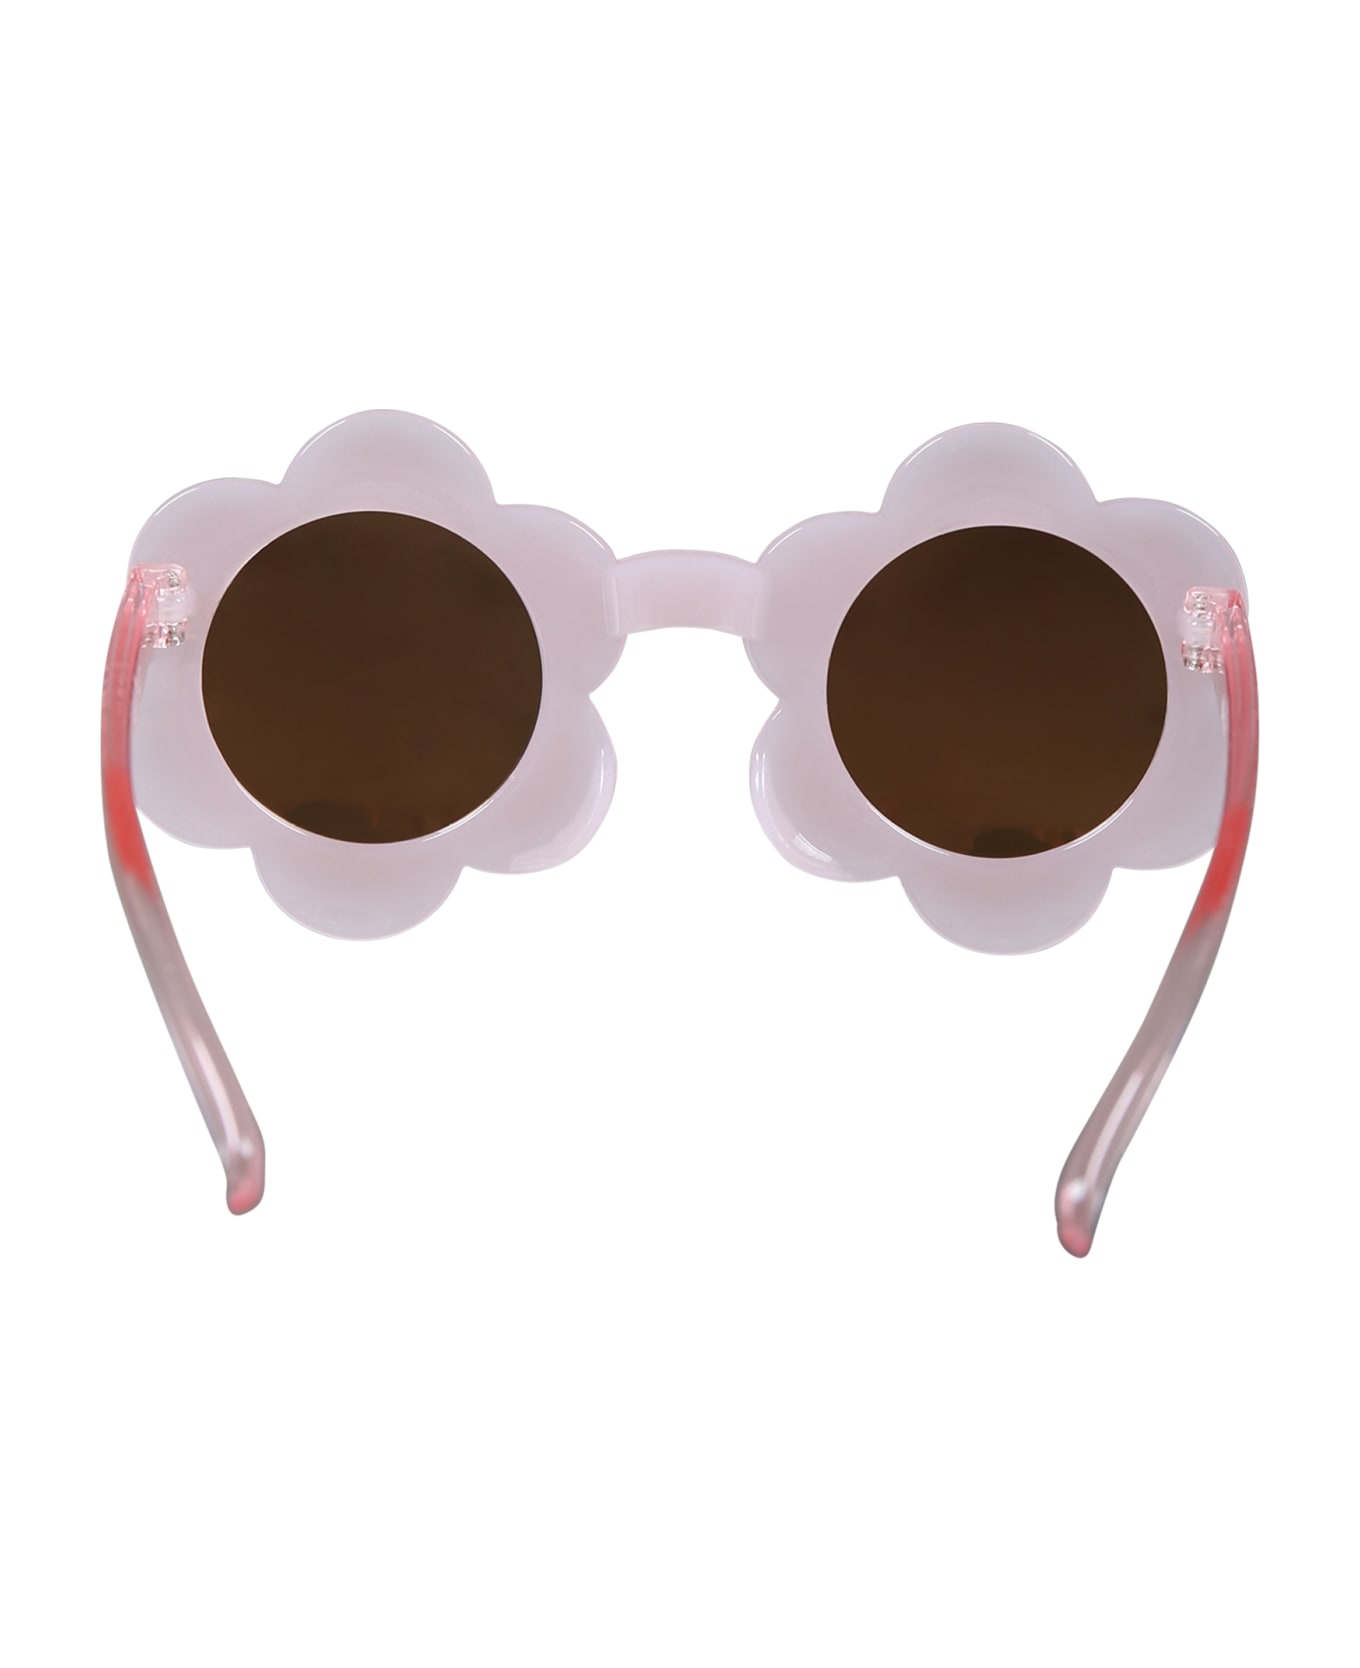 Molo Pink Soleil Sunglasses For Girl - Pink アクセサリー＆ギフト